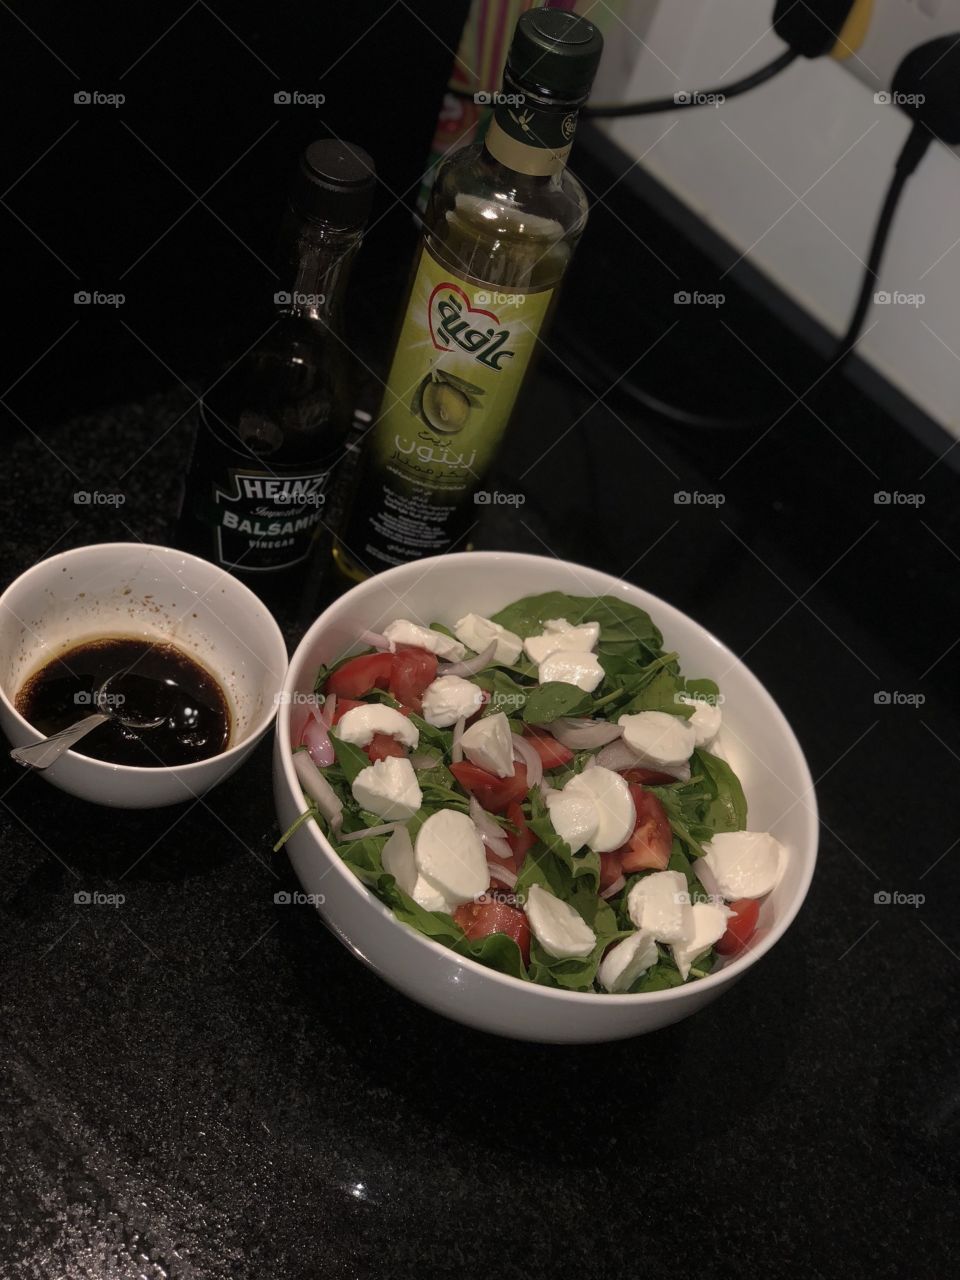 Home-made salad. Fresh mozzarella with Rocca, tomatoes, sliced onions and balsamic vinegar with extra-virgin olive oil